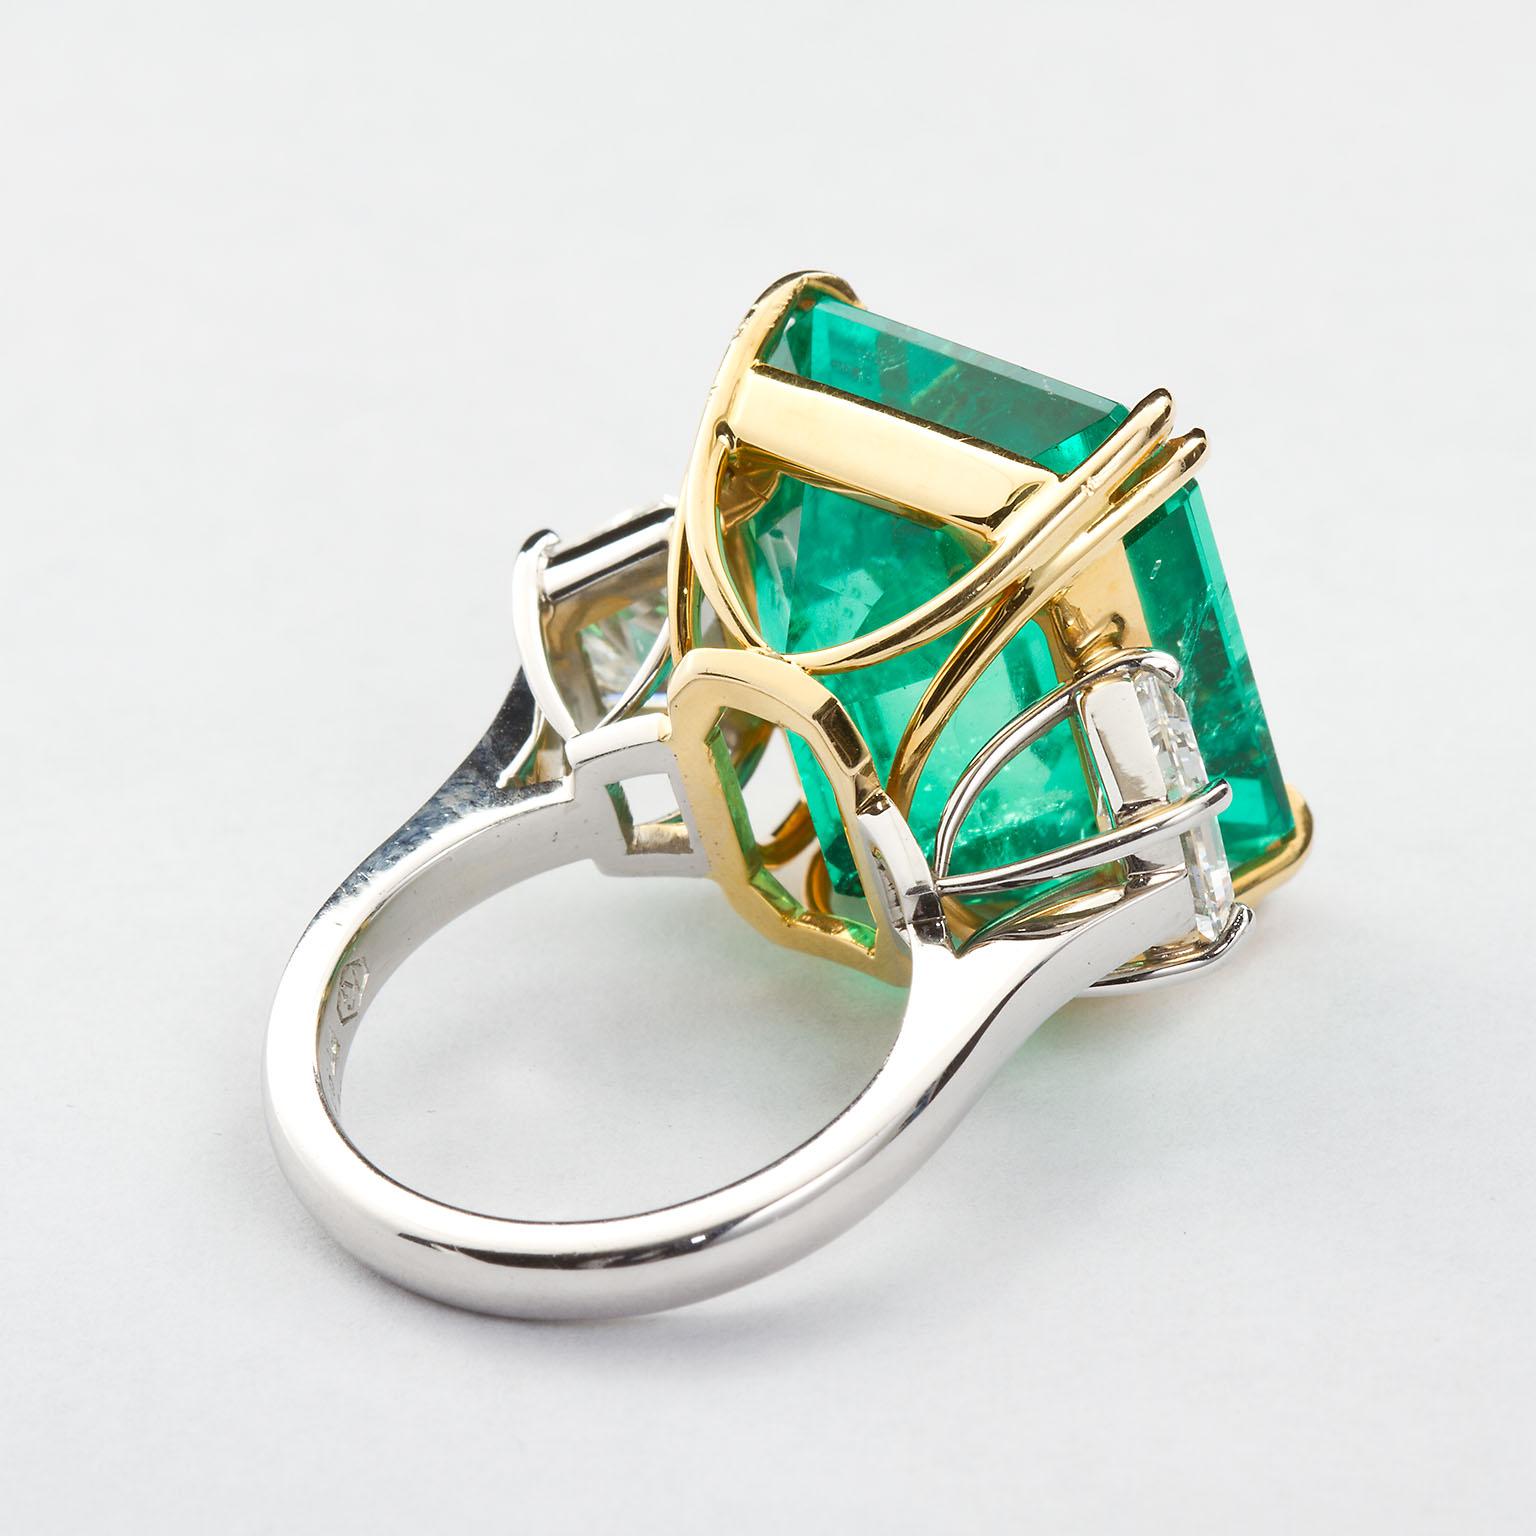 Contemporary 20 Carat Colombian Emerald Engagement Ring 